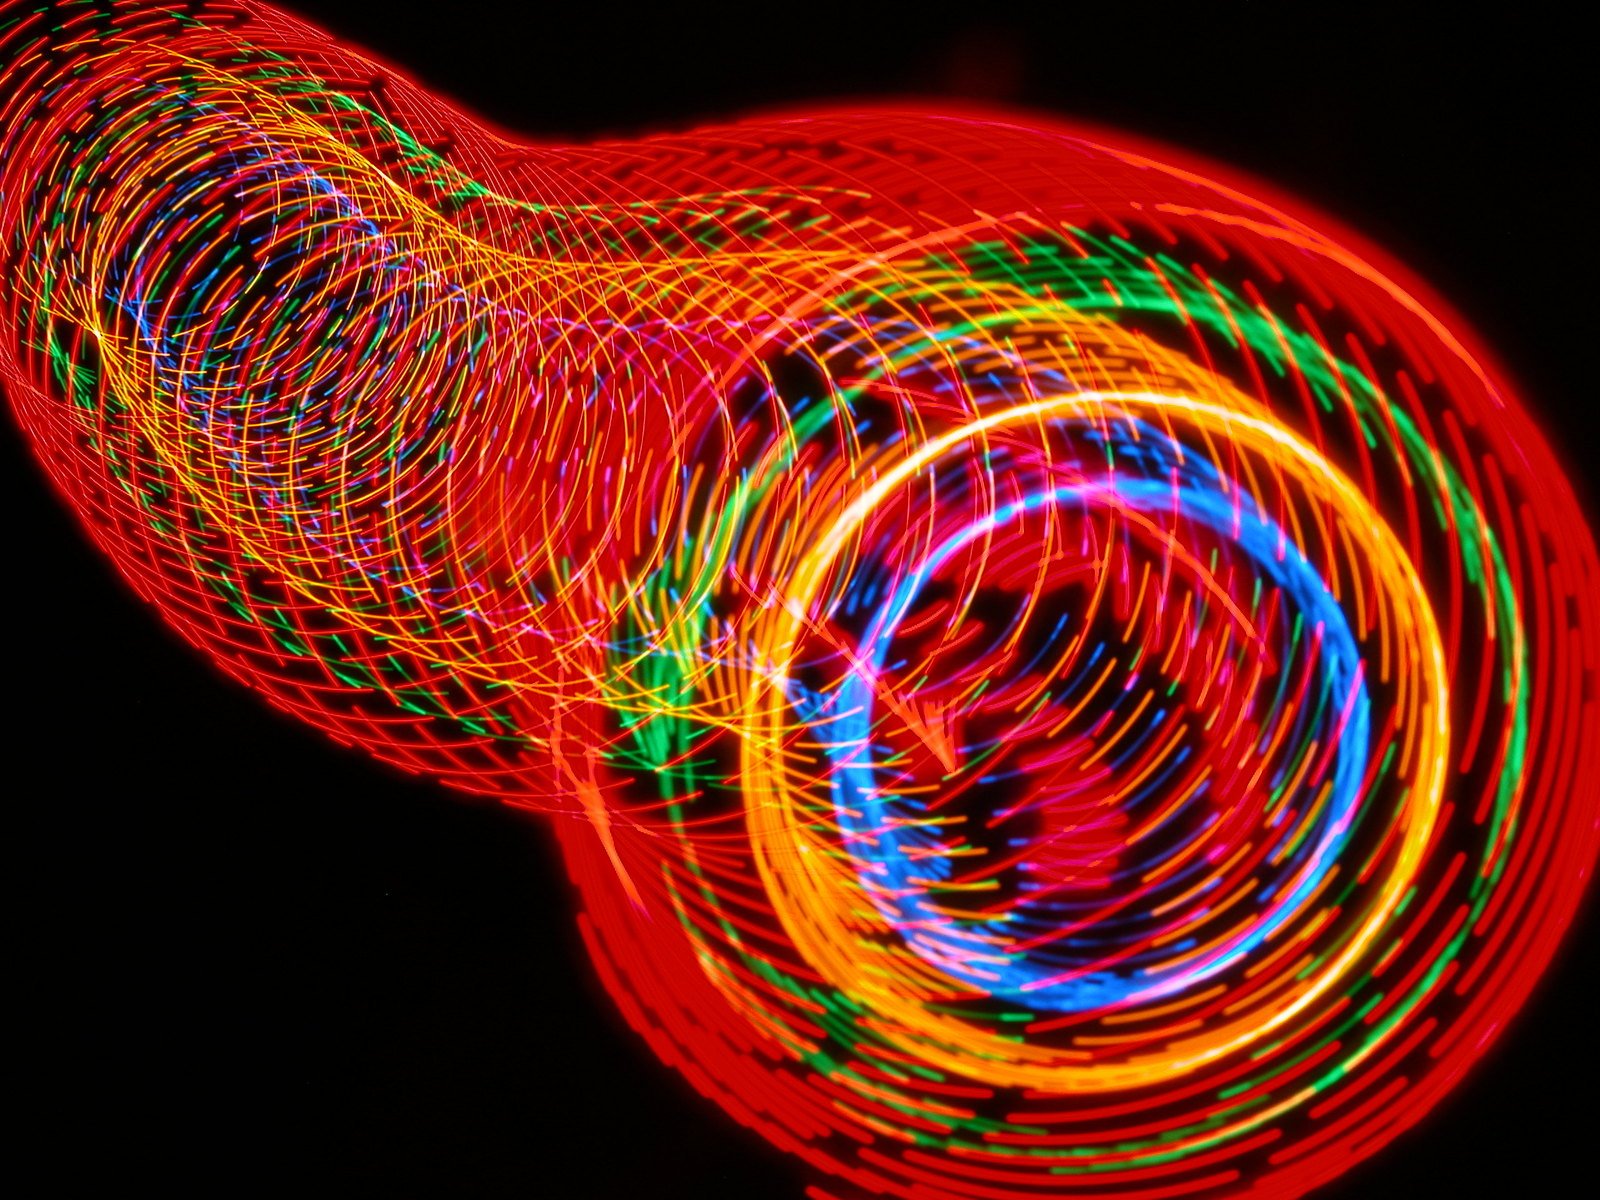 a blurry image of a frisbee that is spinning